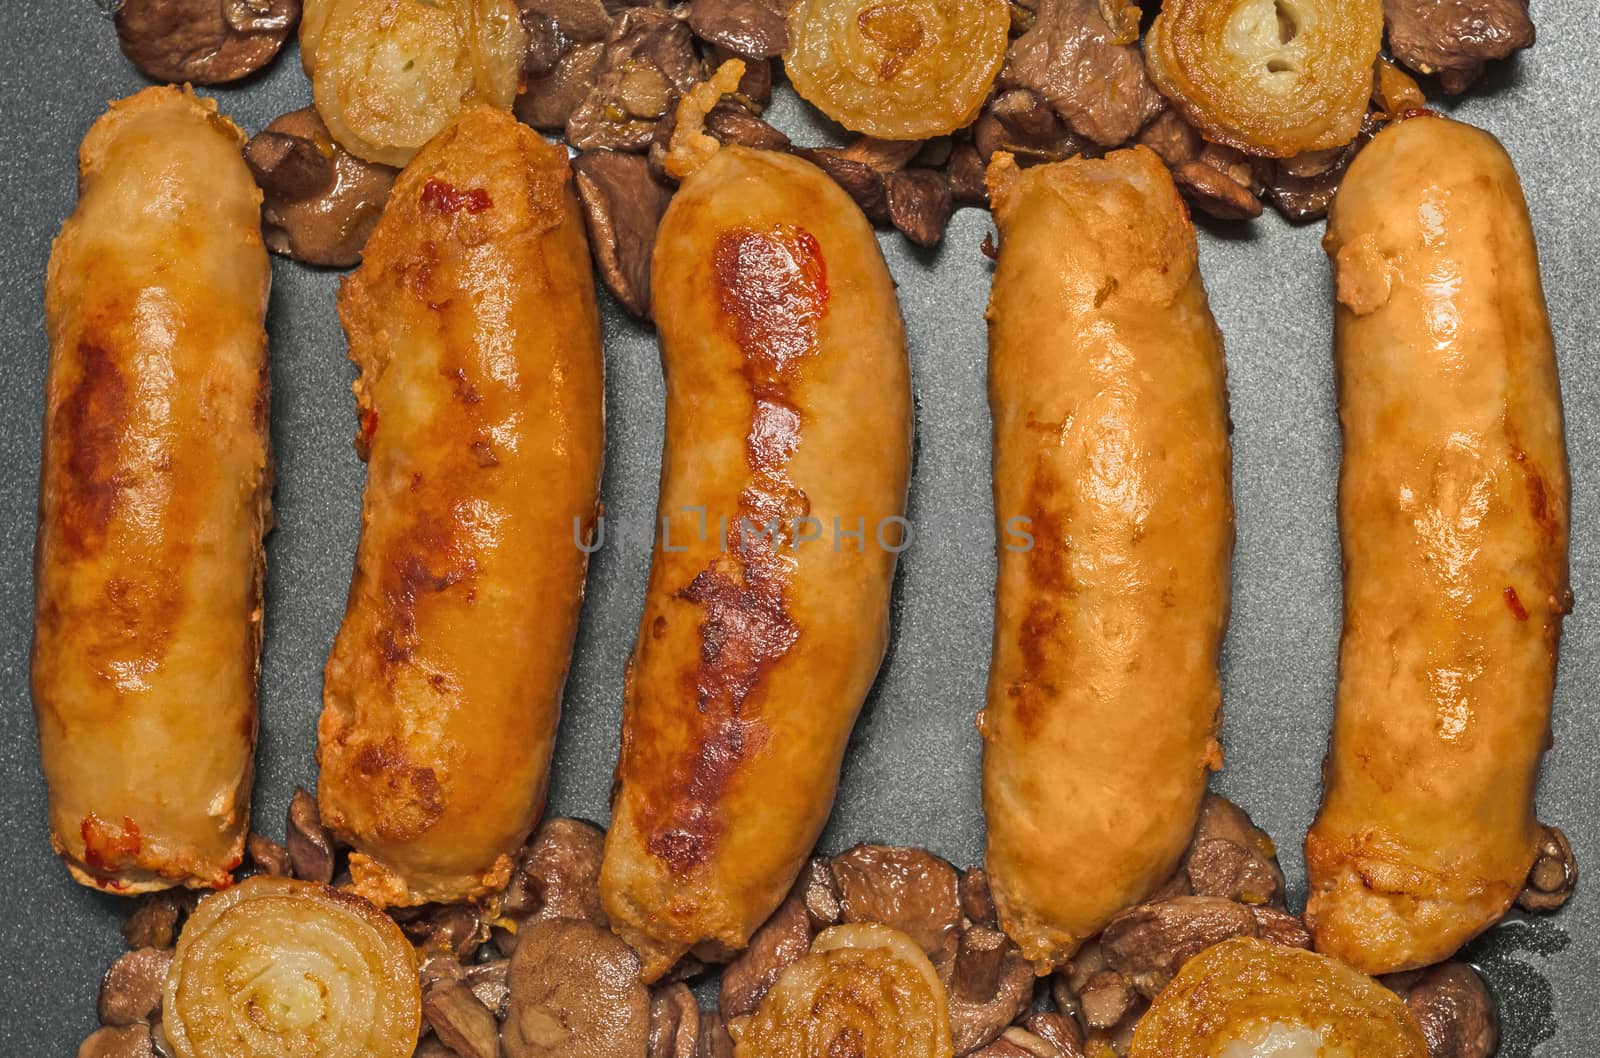 Fried homemade sausage with mushrooms and onions, lay on a baking sheet.